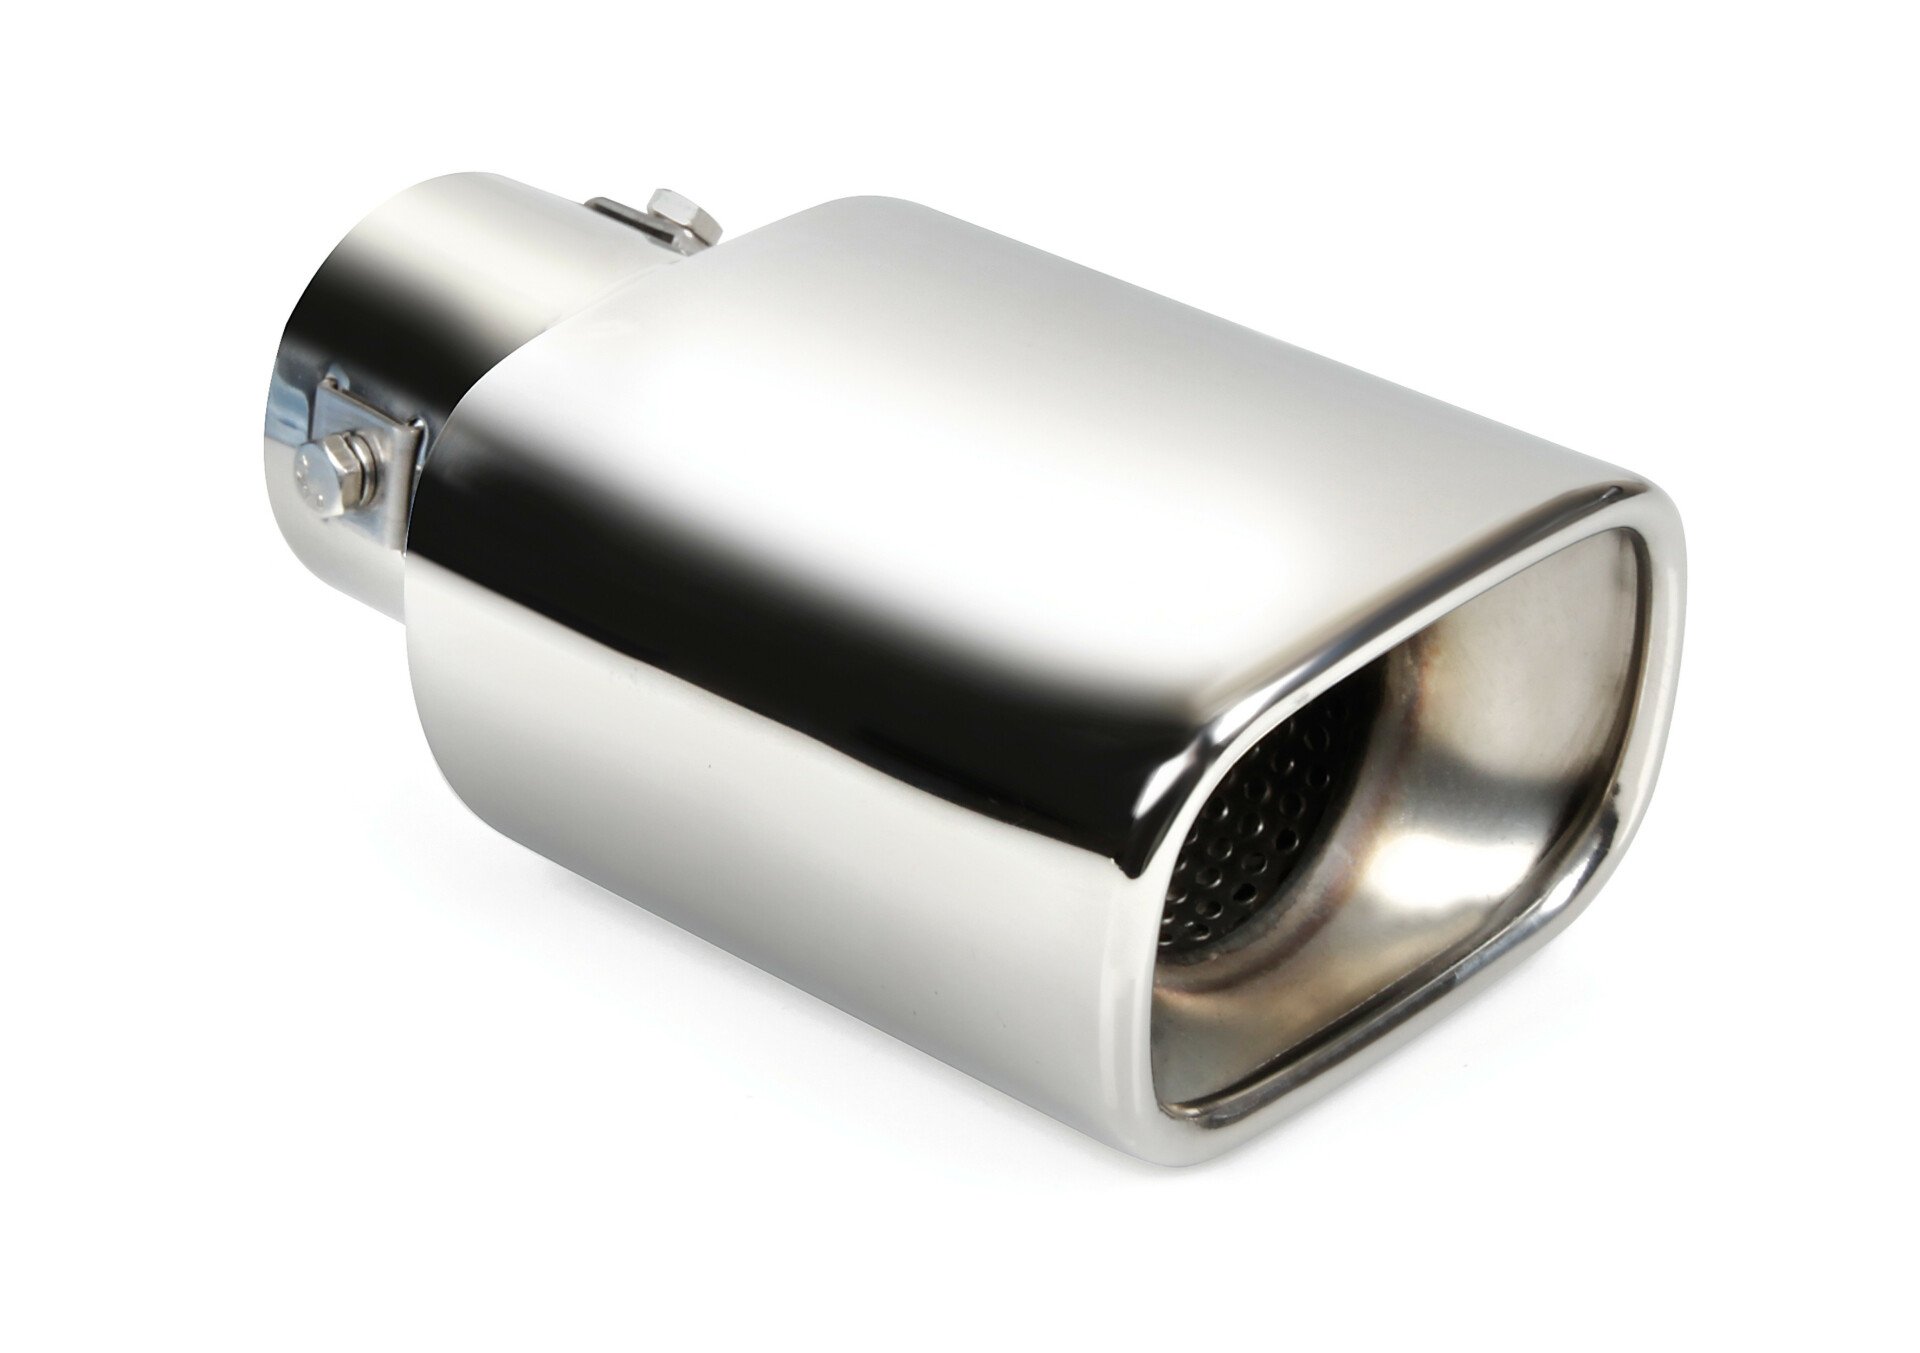 TS-59 Stainless steel exhaust blowpipe thumb